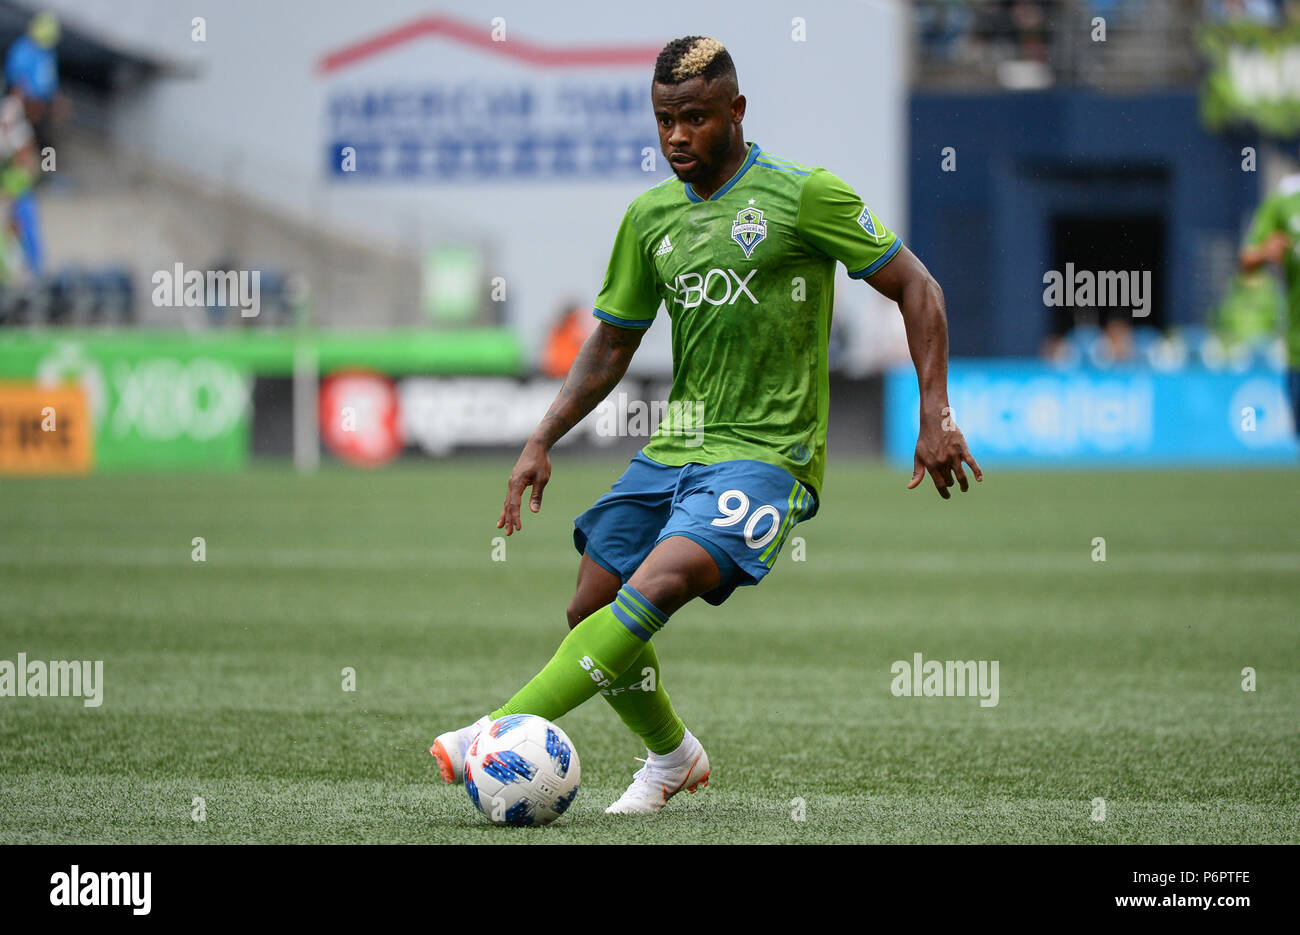 Seattle, Washington, USA. 30th June, 2018. The Sounders WAYLON FRANCIS (90) in action as the Portland Timbers play the Seattle Sounders in a Western Conference match at Century Link Field in Seattle, WA. Credit: Jeff Halstead/ZUMA Wire/Alamy Live News Stock Photo